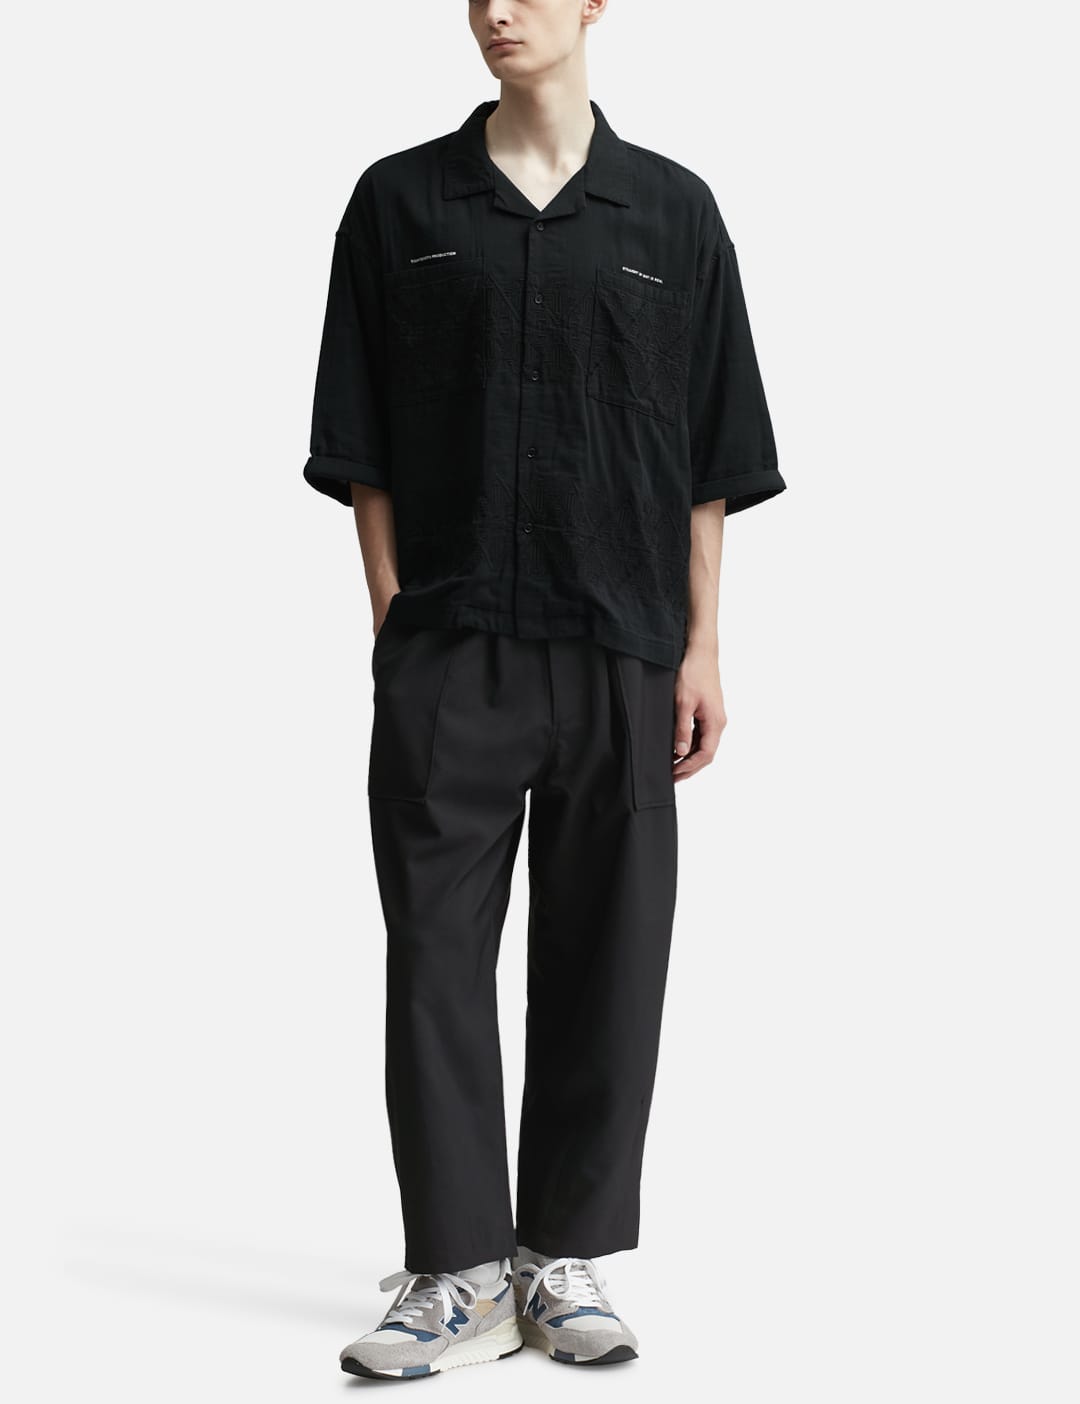 TIGHTBOOTH - Baker Baggy Slacks | HBX - Globally Curated Fashion 